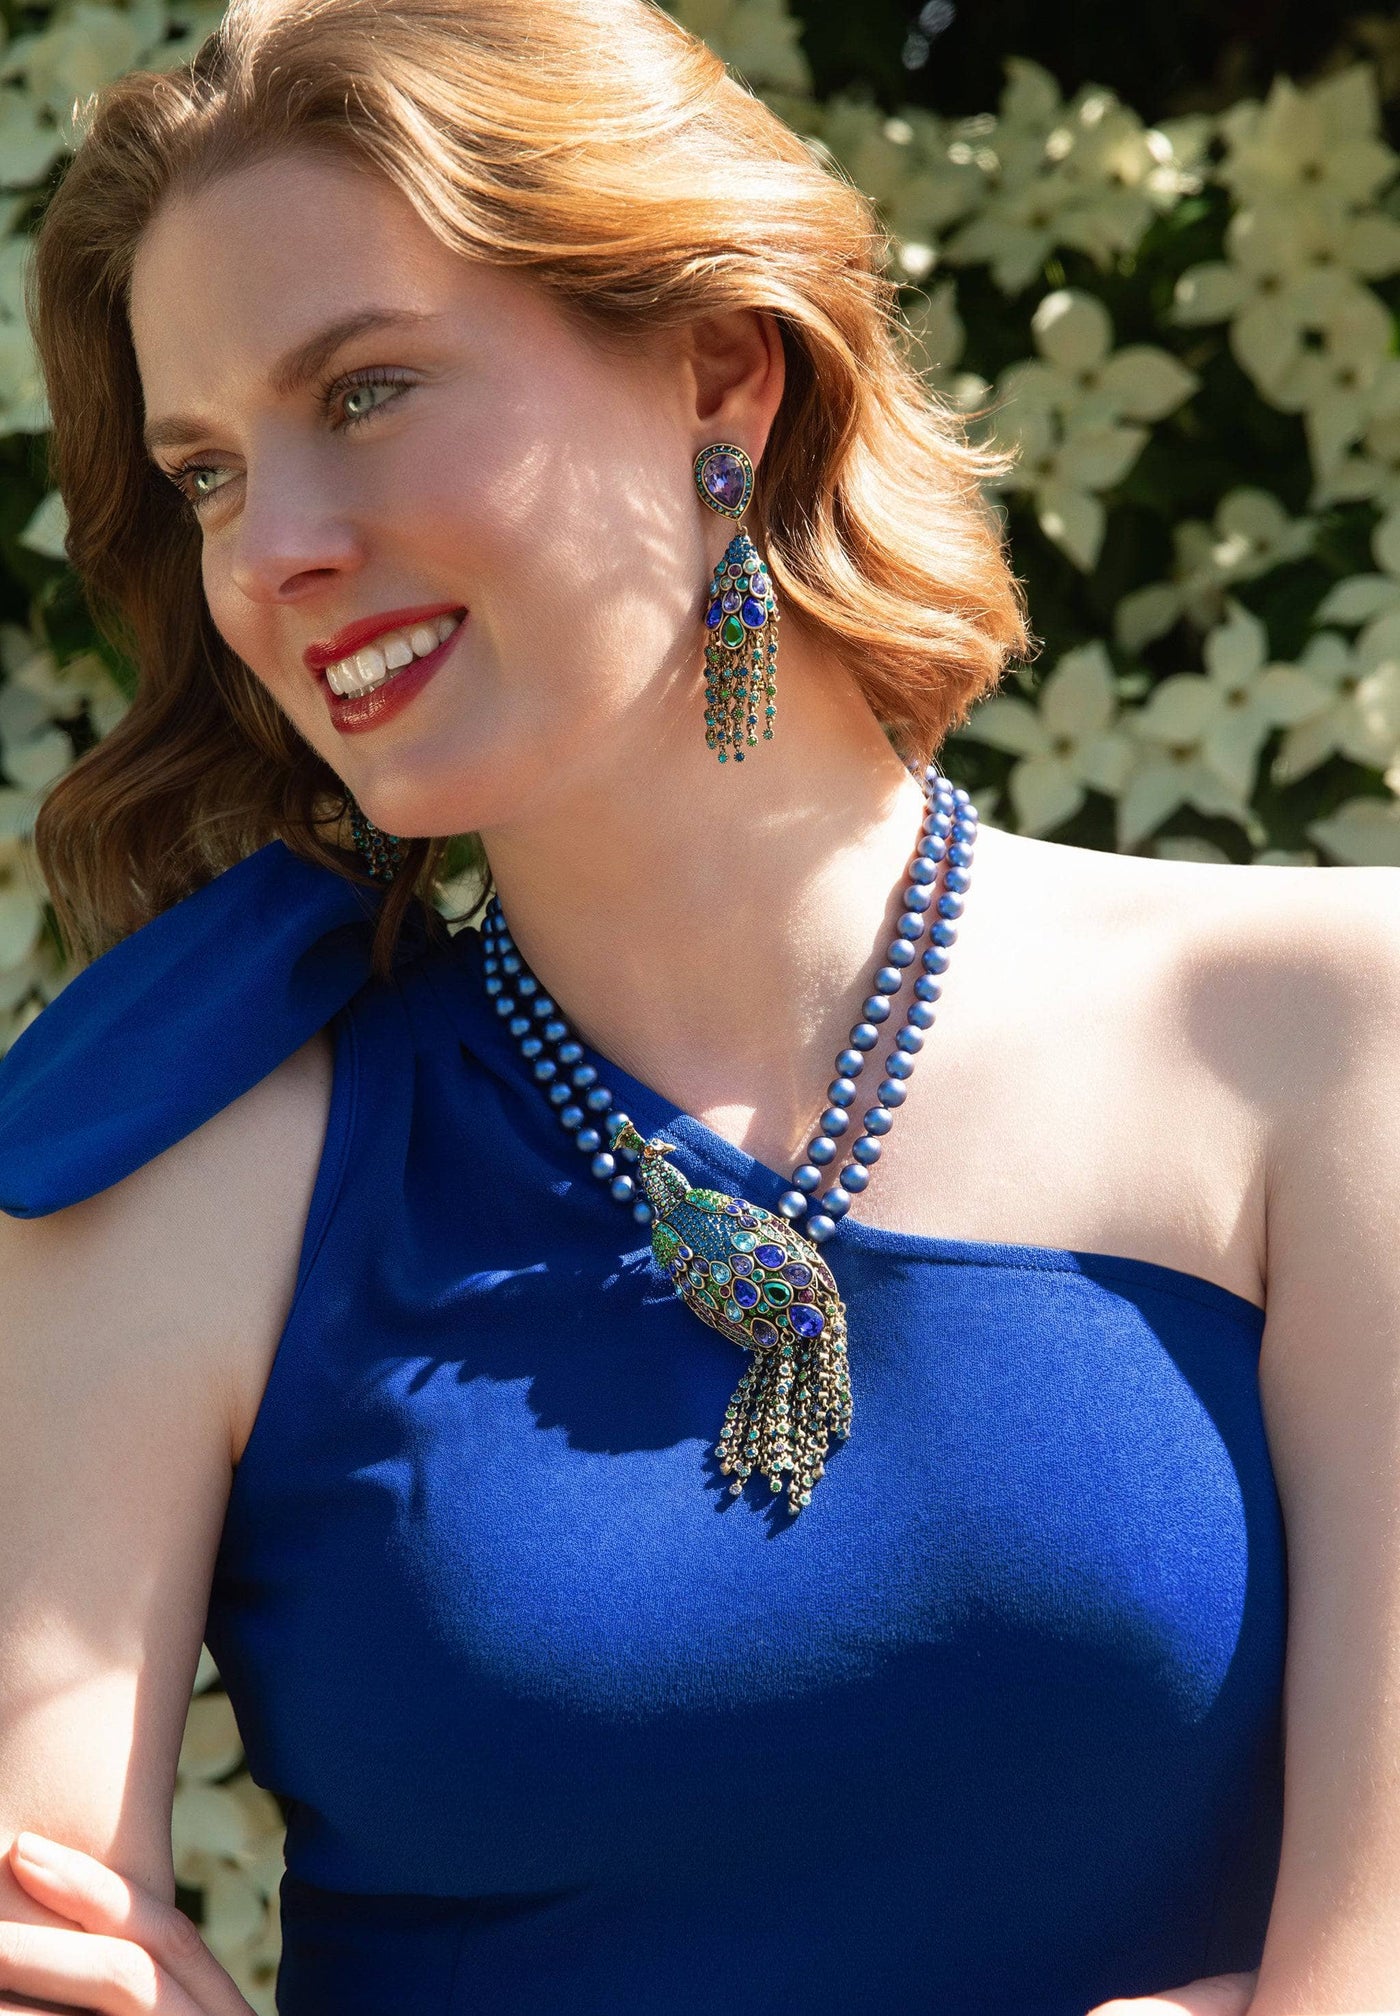 HEIDI DAUS®"Let Down Your Feathers" Beaded Crystal Peacock Necklace